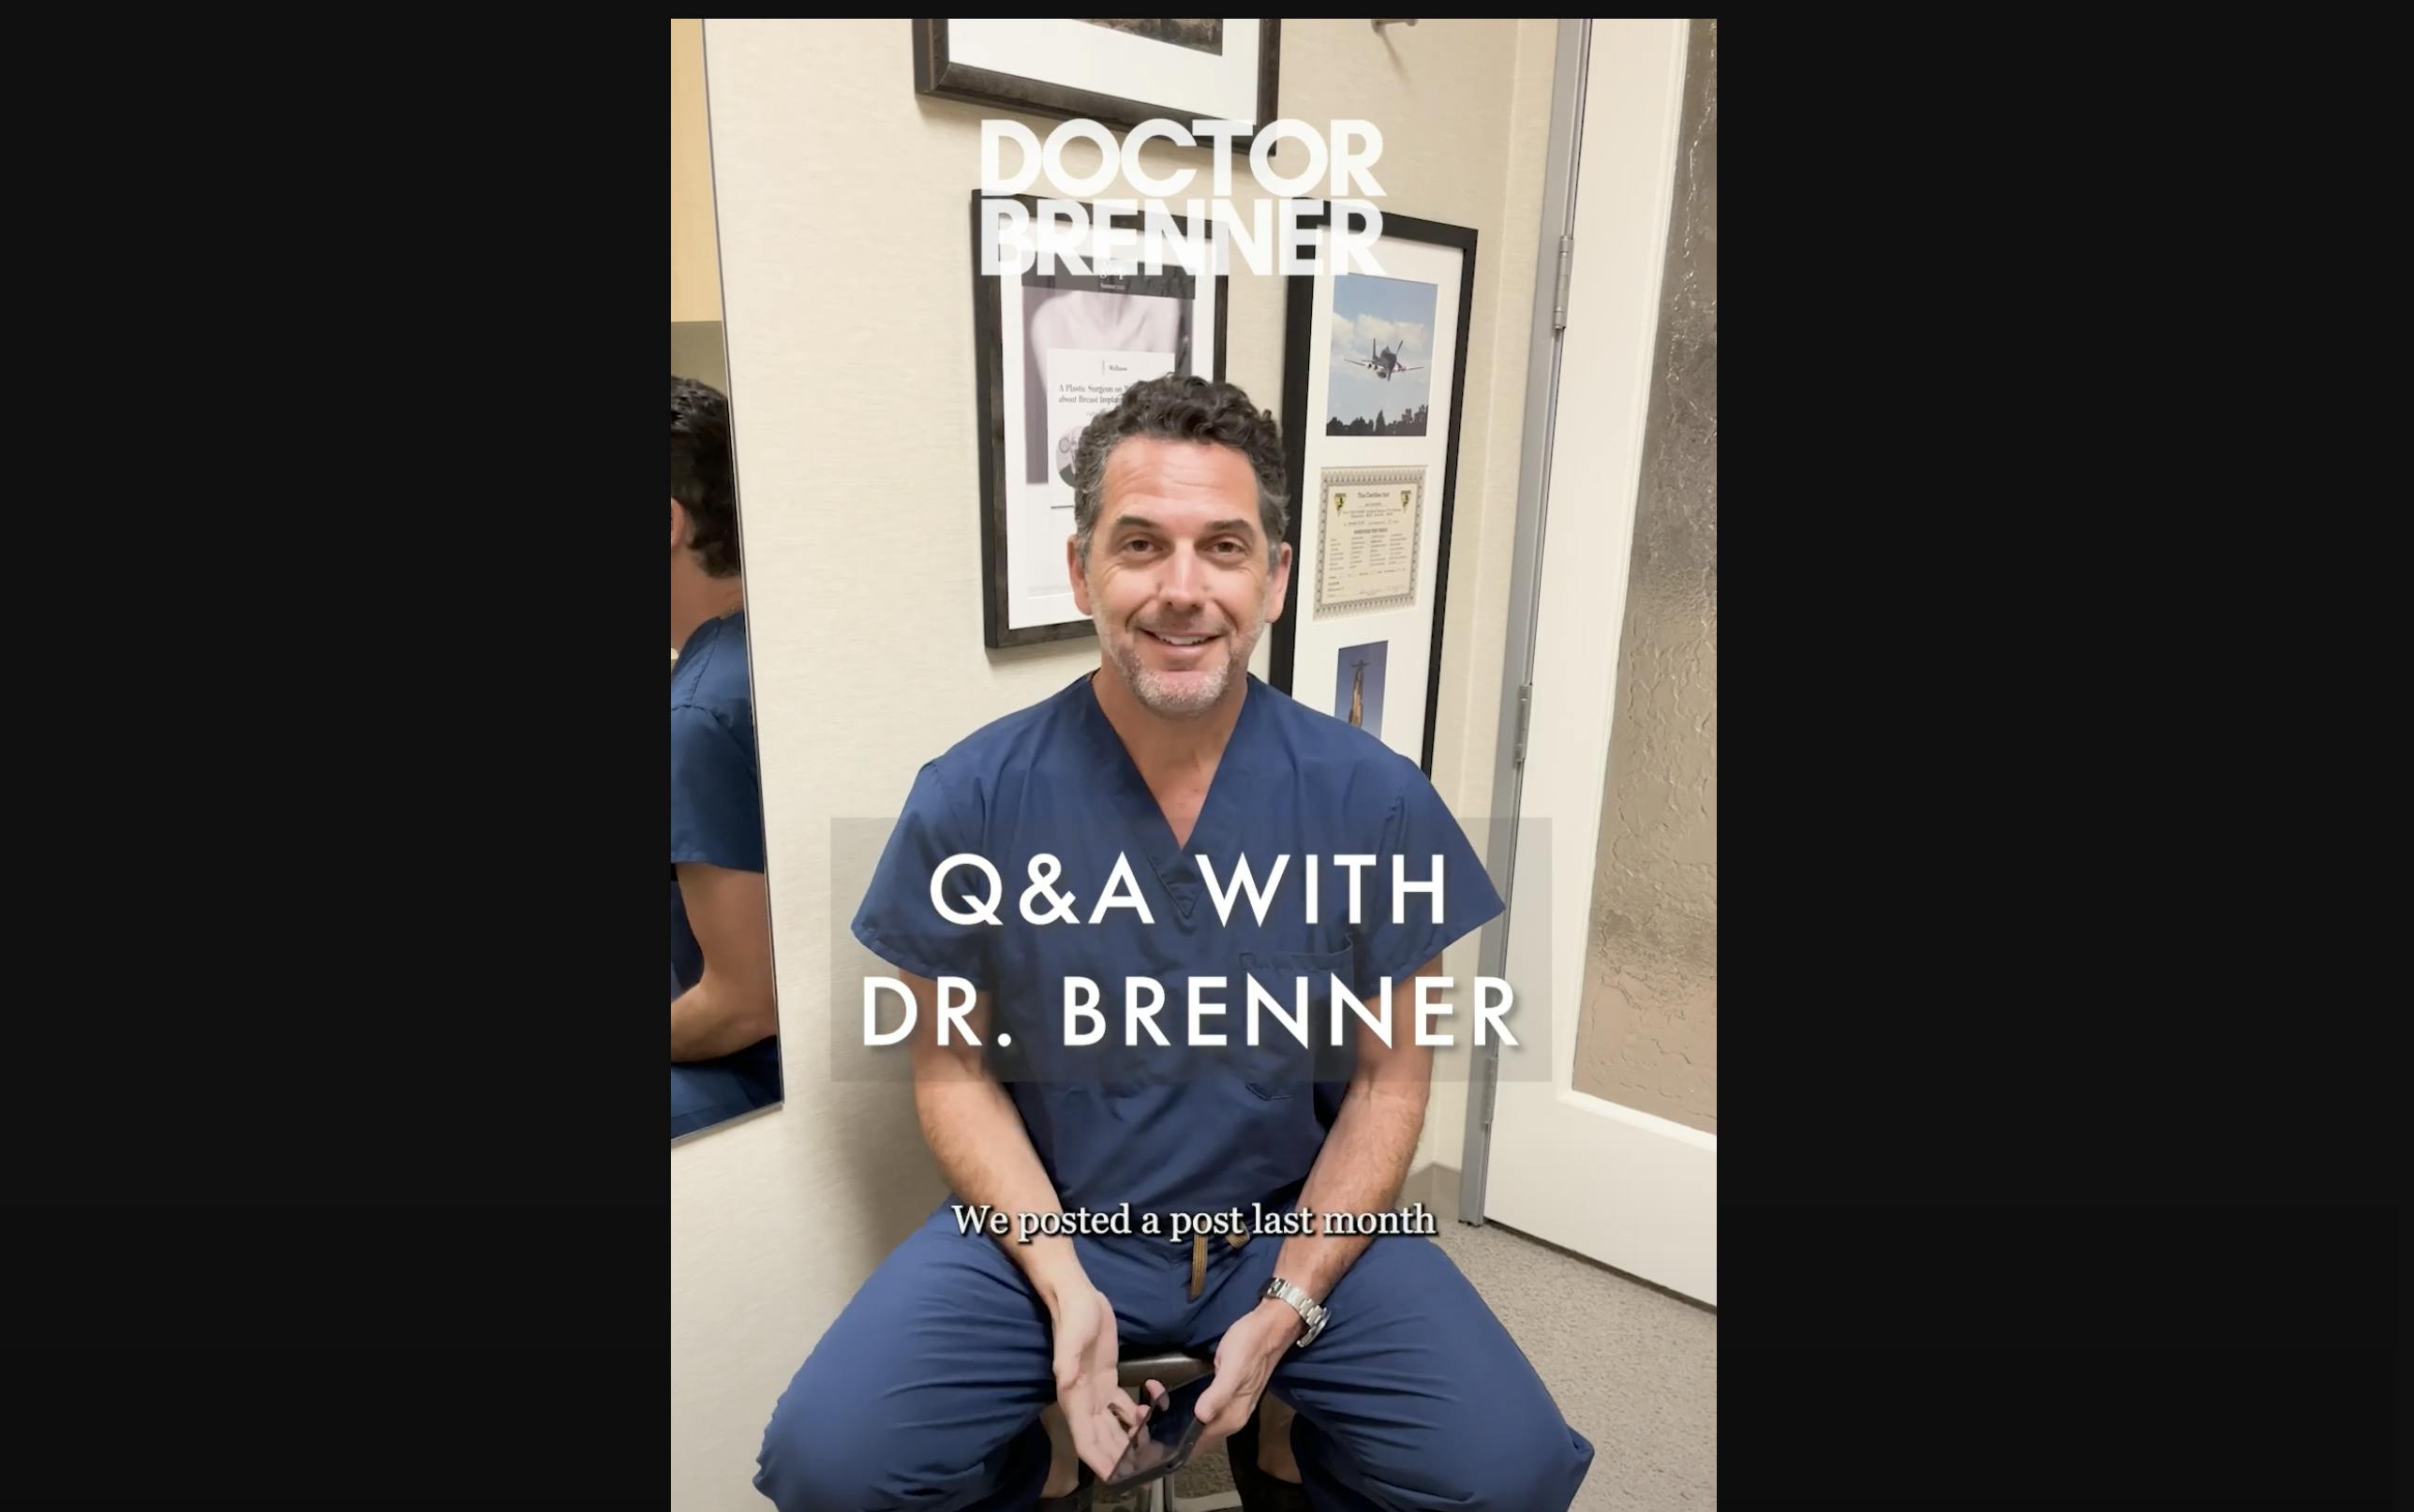 Your Surgery Questions Answered by Dr. Brenner